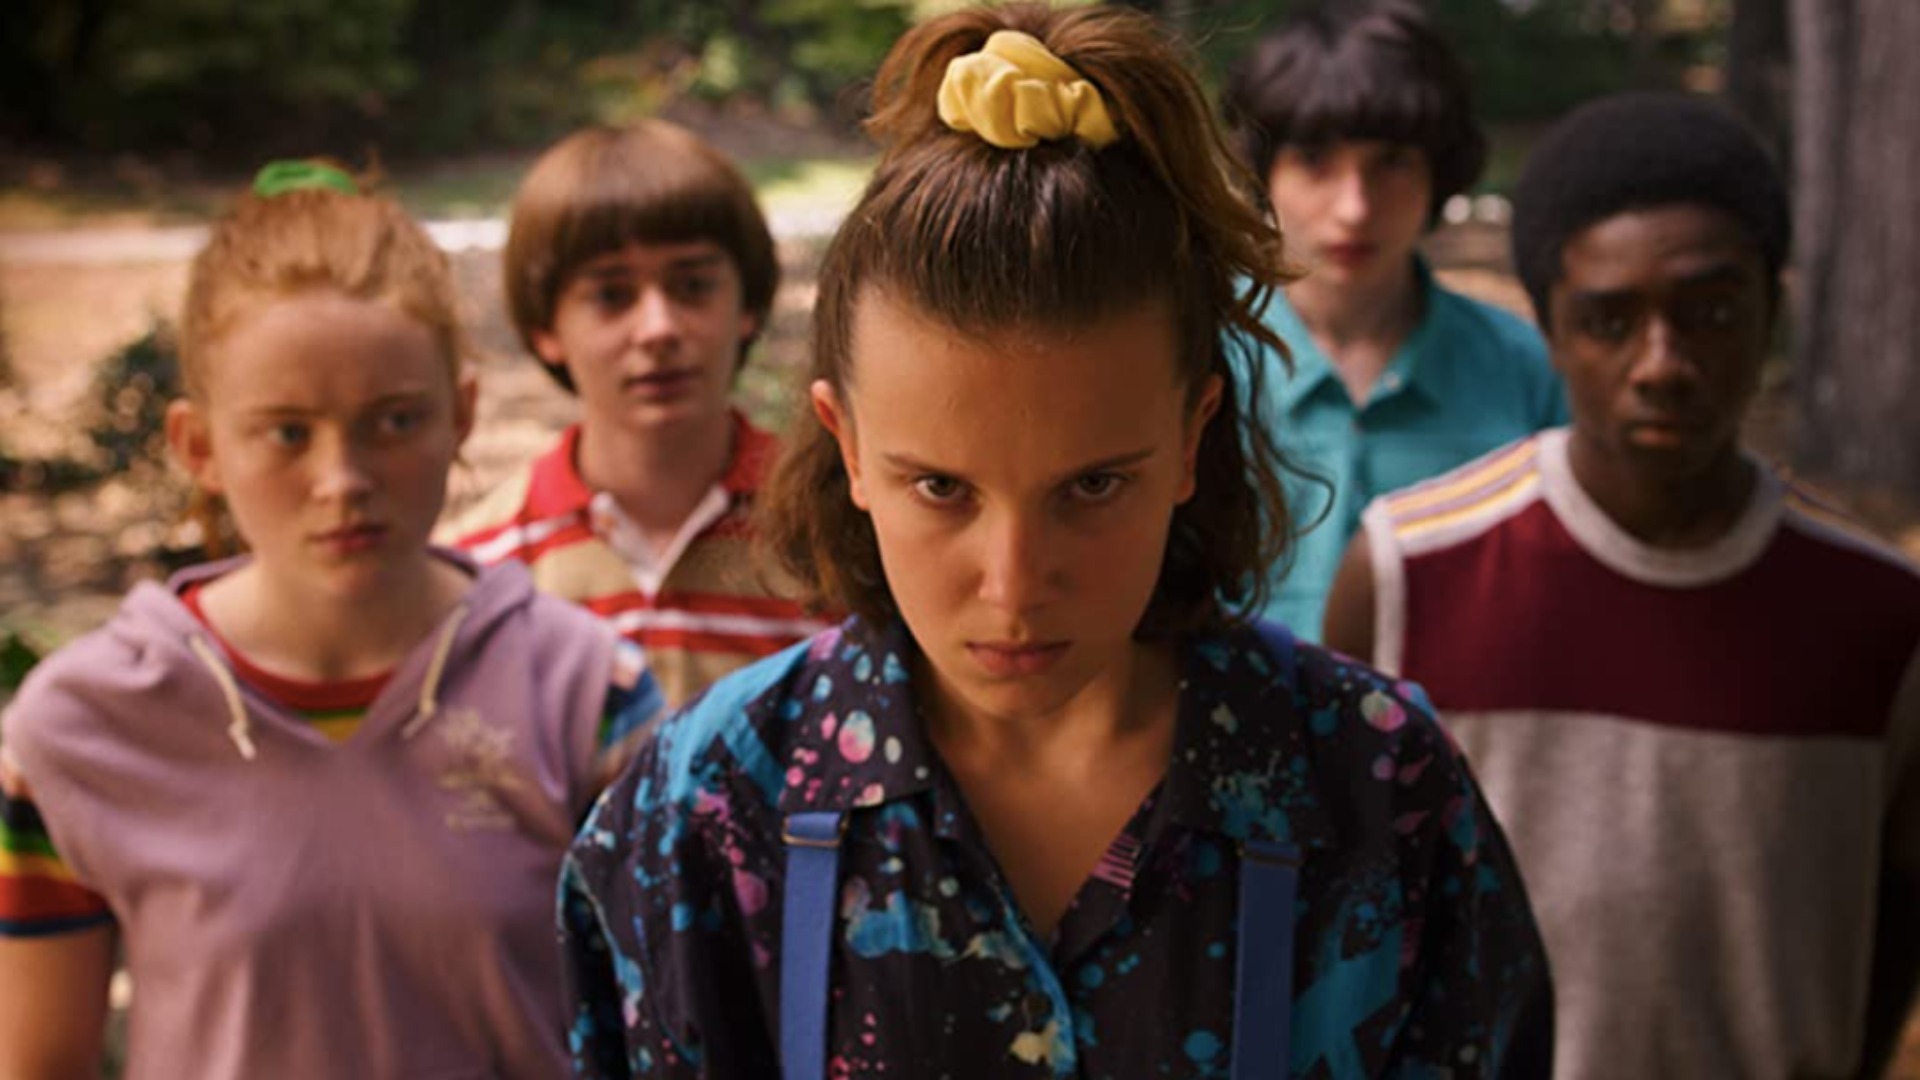 Stranger Things' Meets 'The Shining' In Netflix's New Series